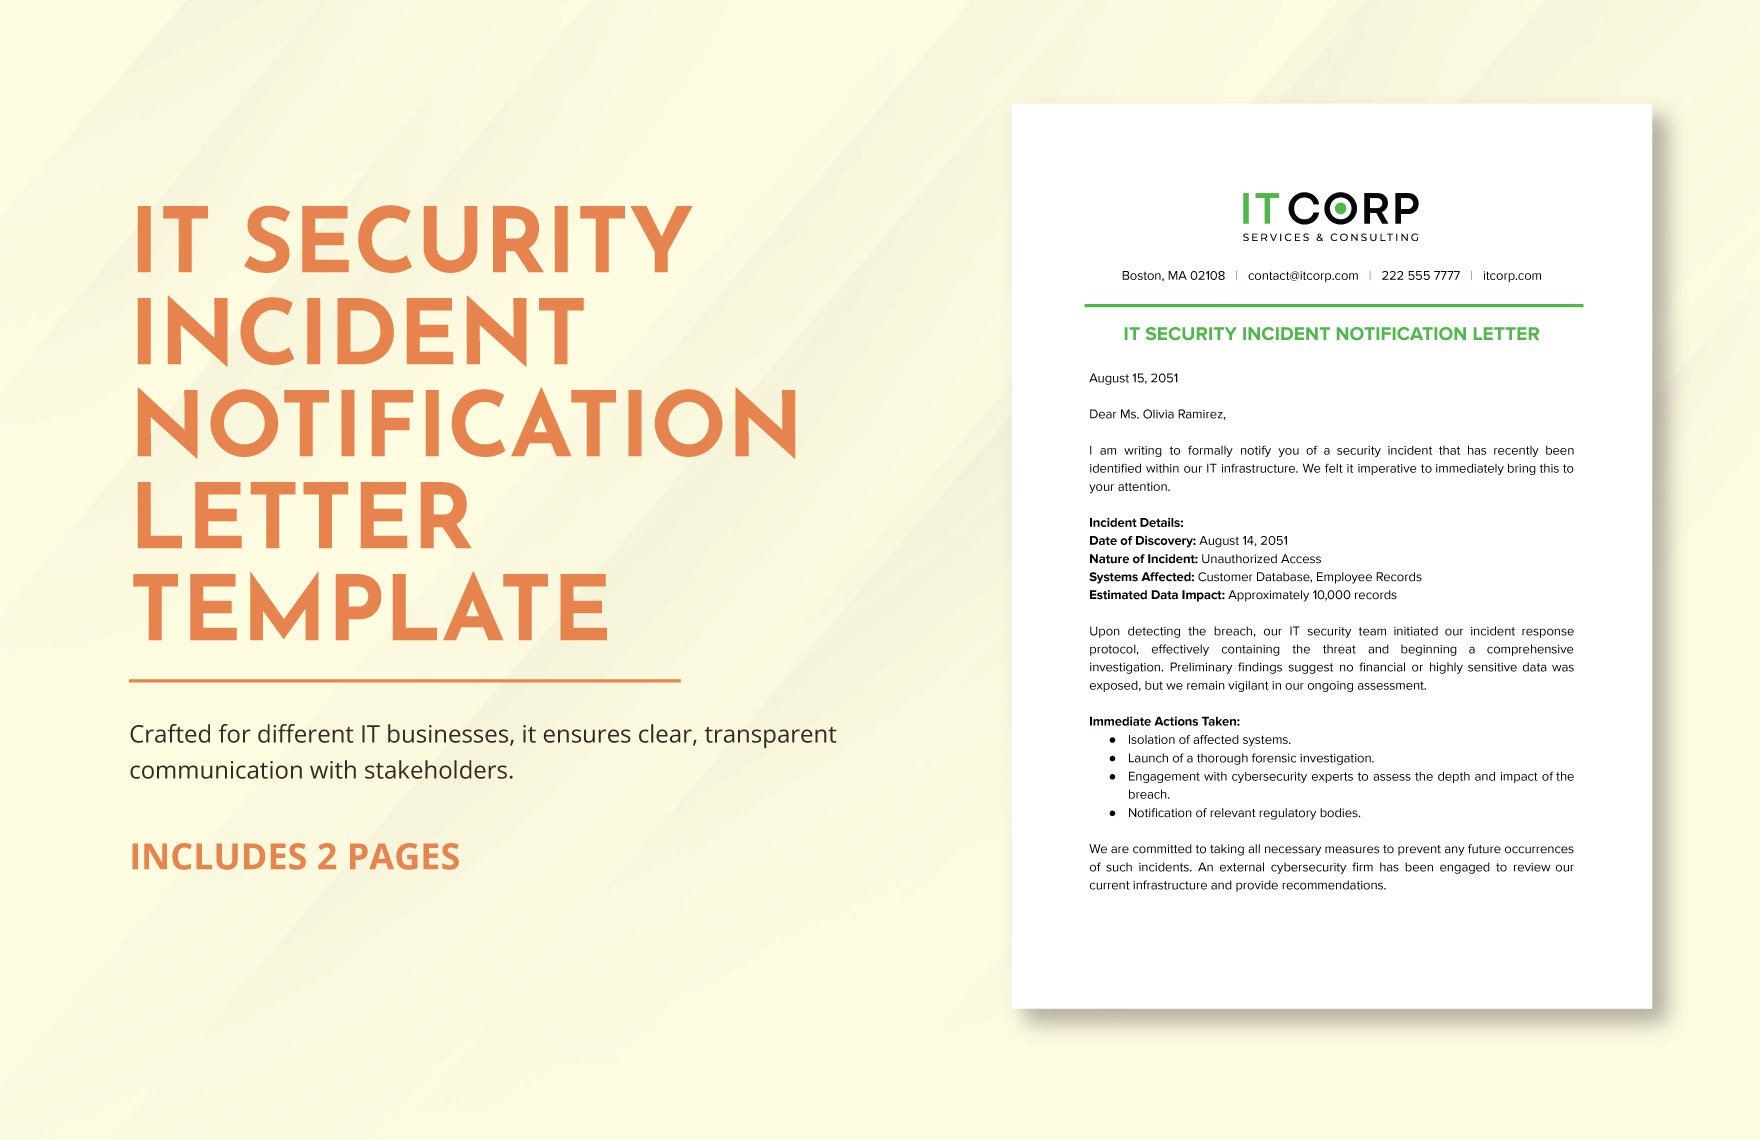 IT Security Incident Notification Letter Template